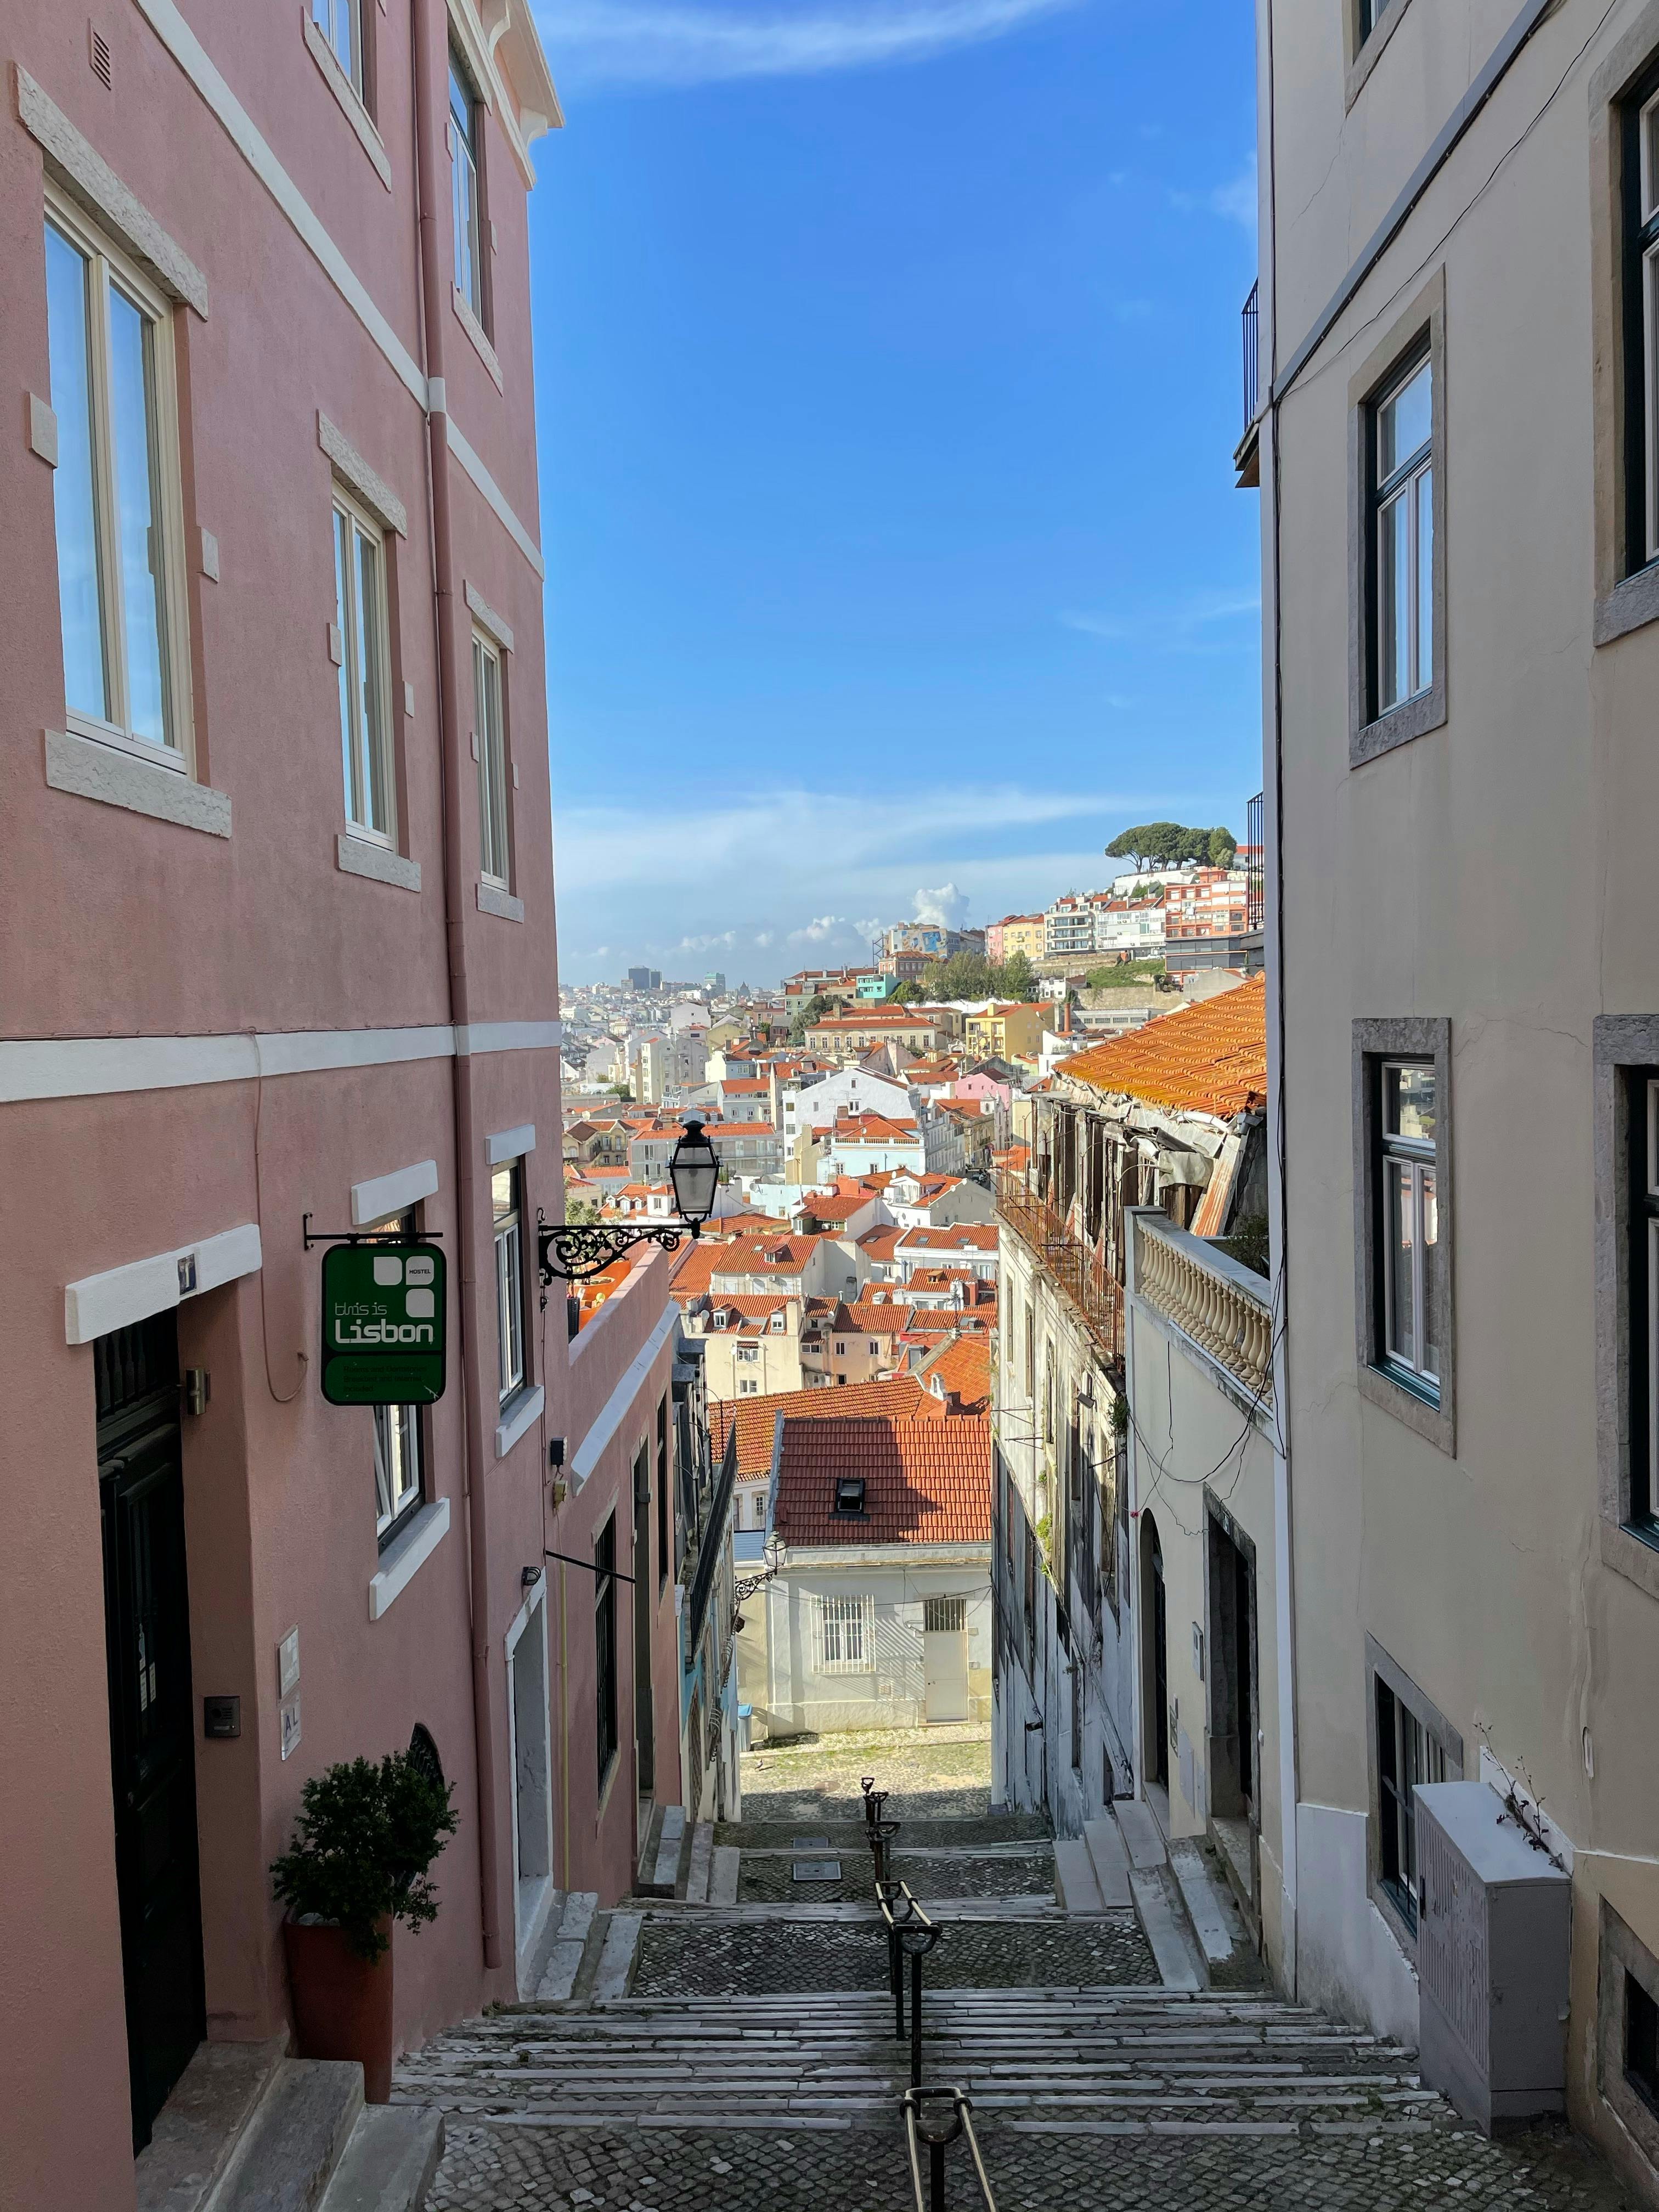 cityscape of lisbon photographed from between the buildings